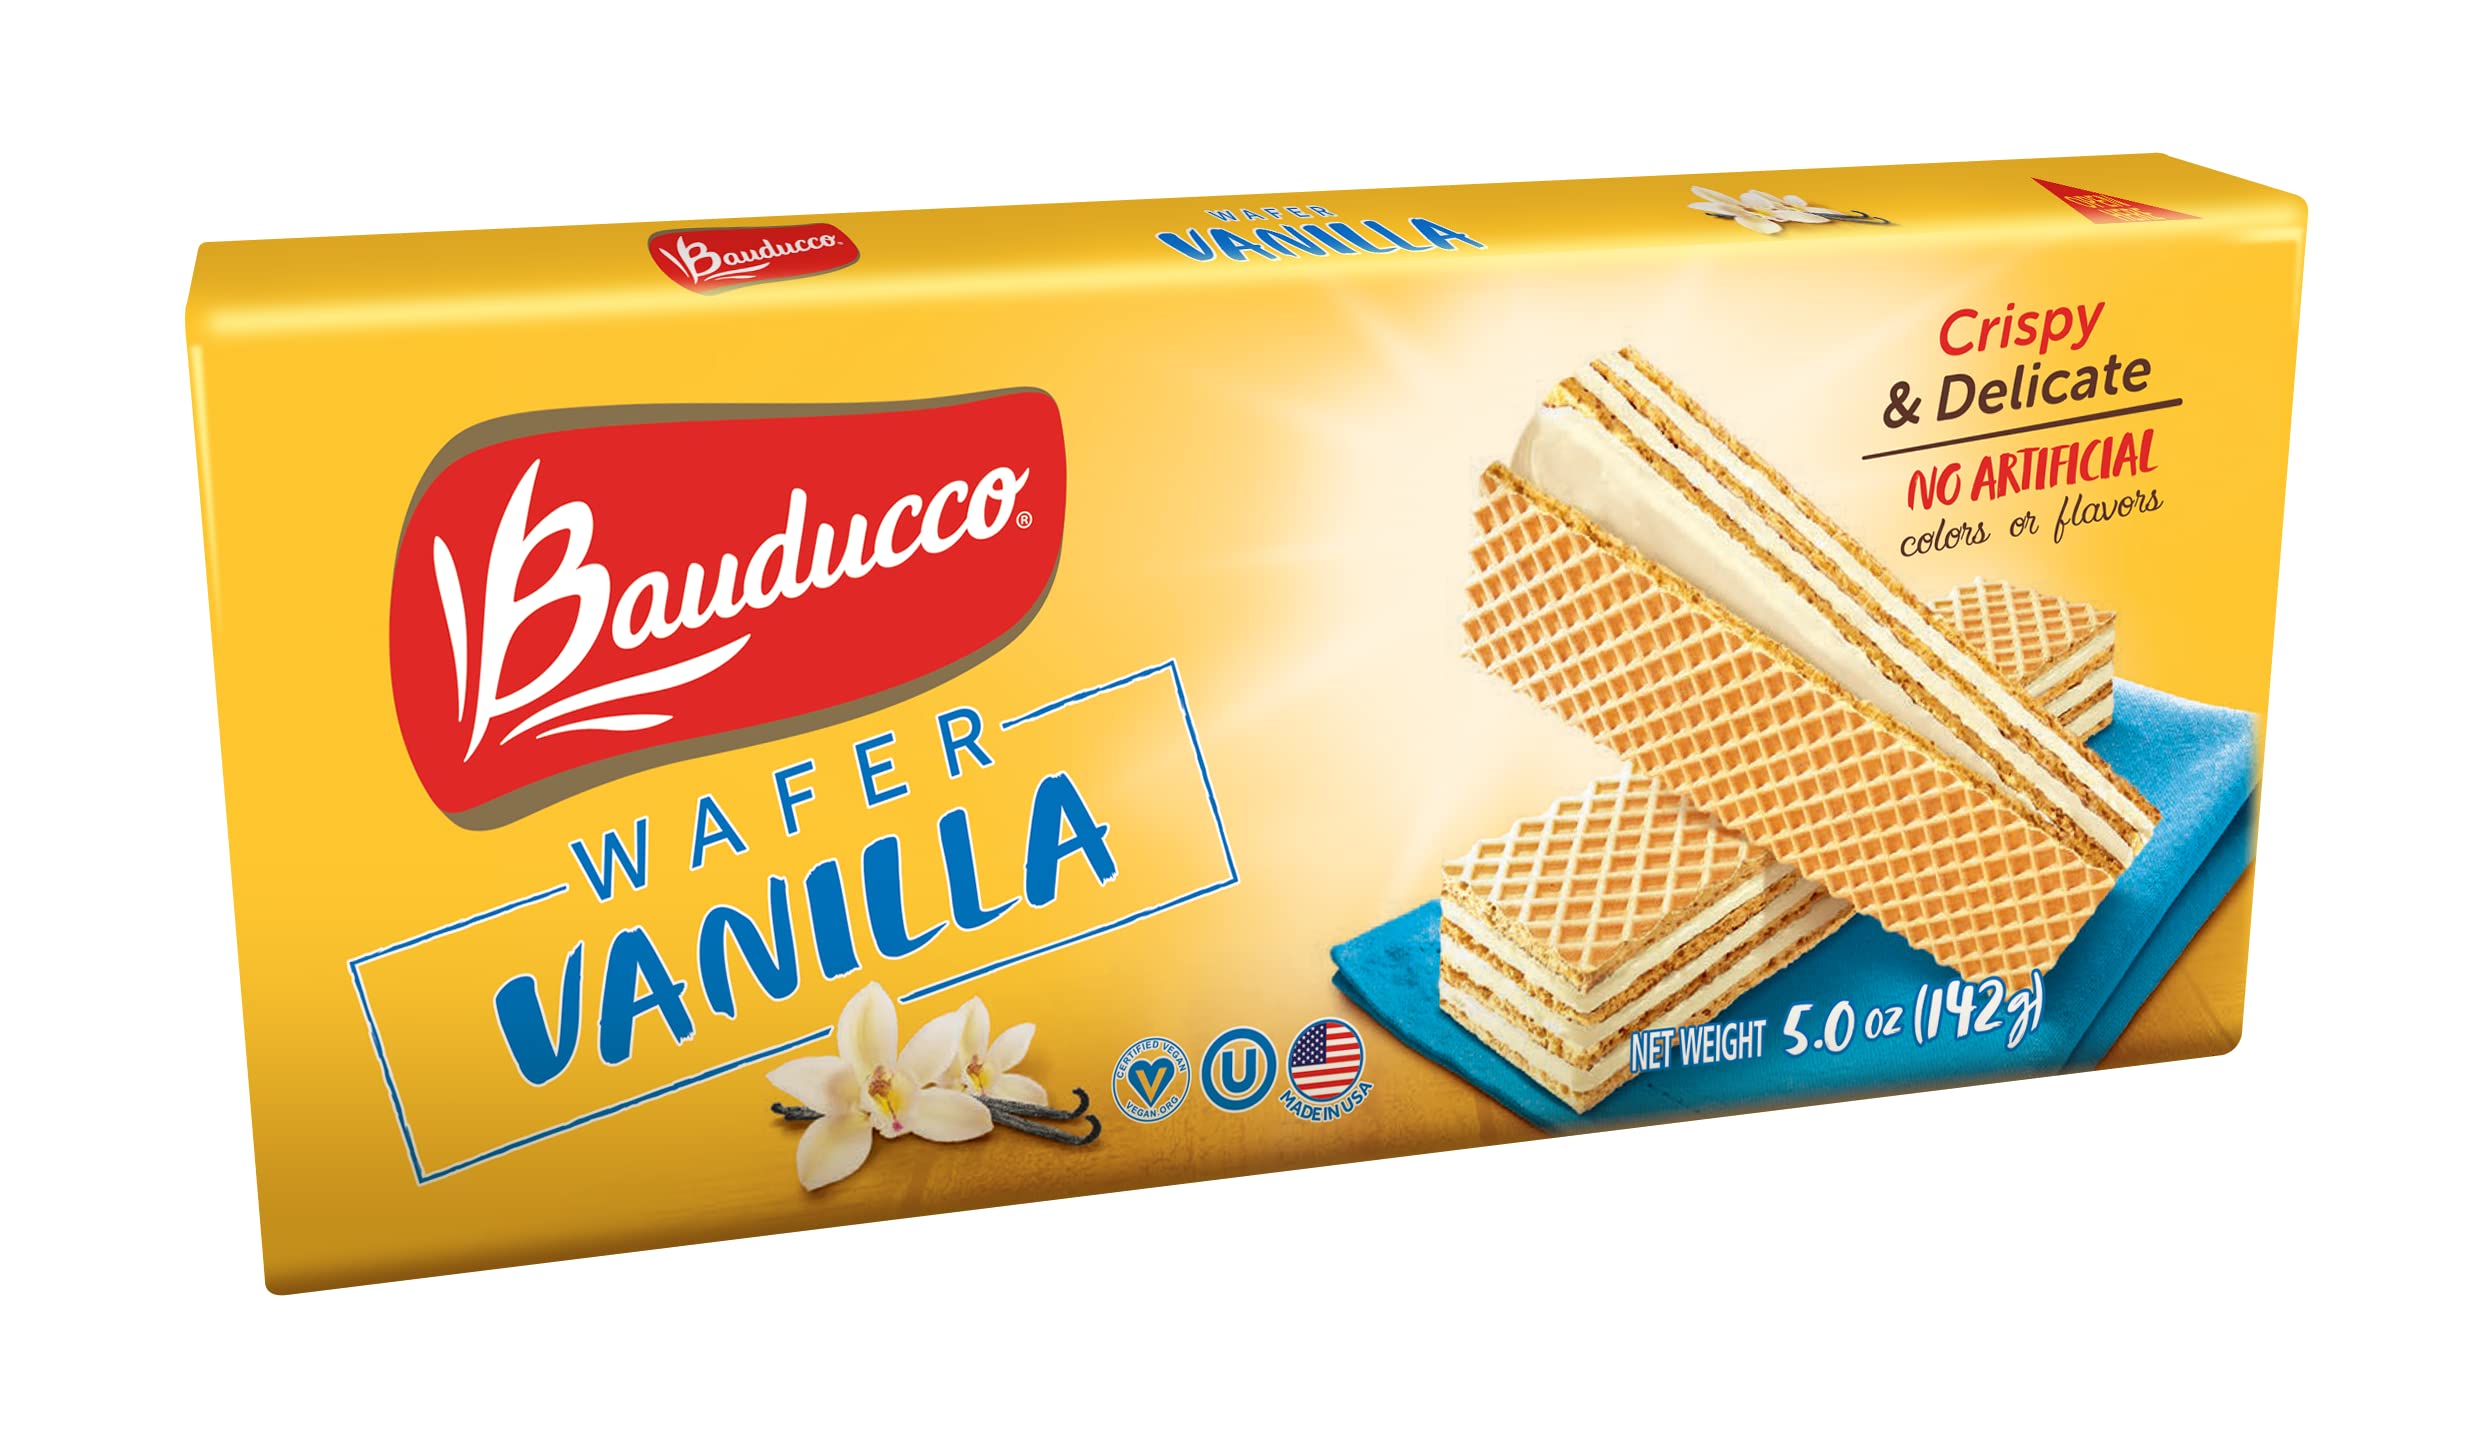 Bauducco Chocolate or Vanilla Wafers Crispy Wafer Cookies With 3 Delicious, Indulgent, Decadent Layers Flavored Cream $1 each